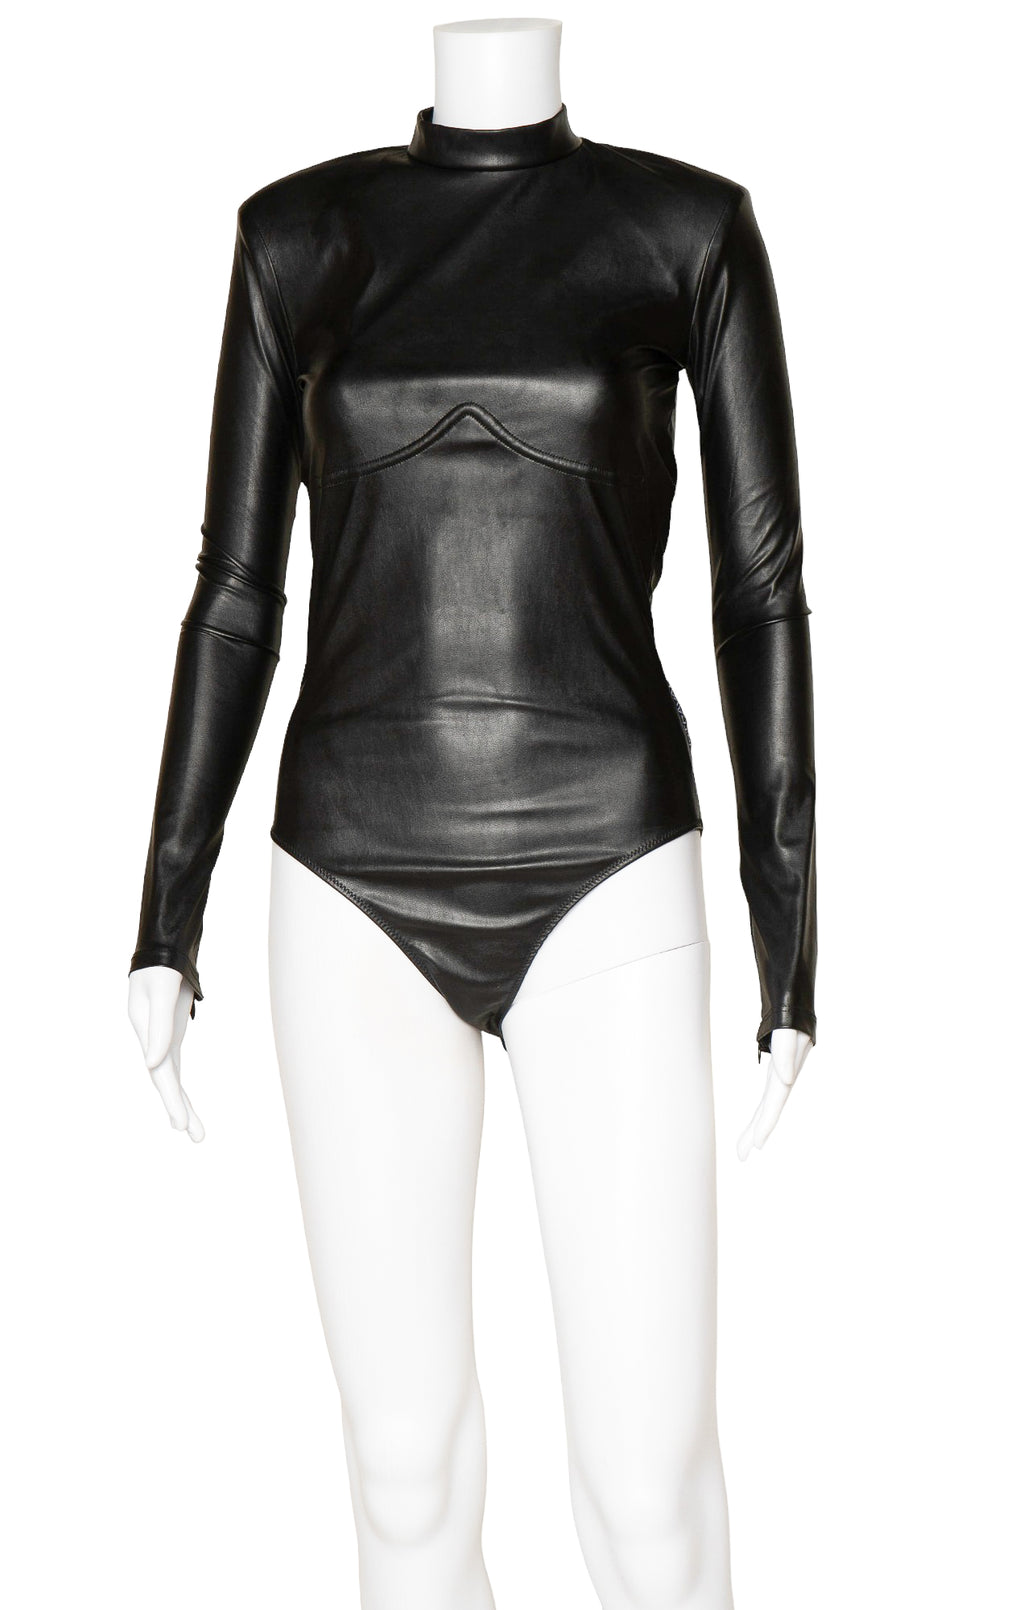 JUST CAVALLI Bodysuit Size: IT 40 / Comparable to US 4